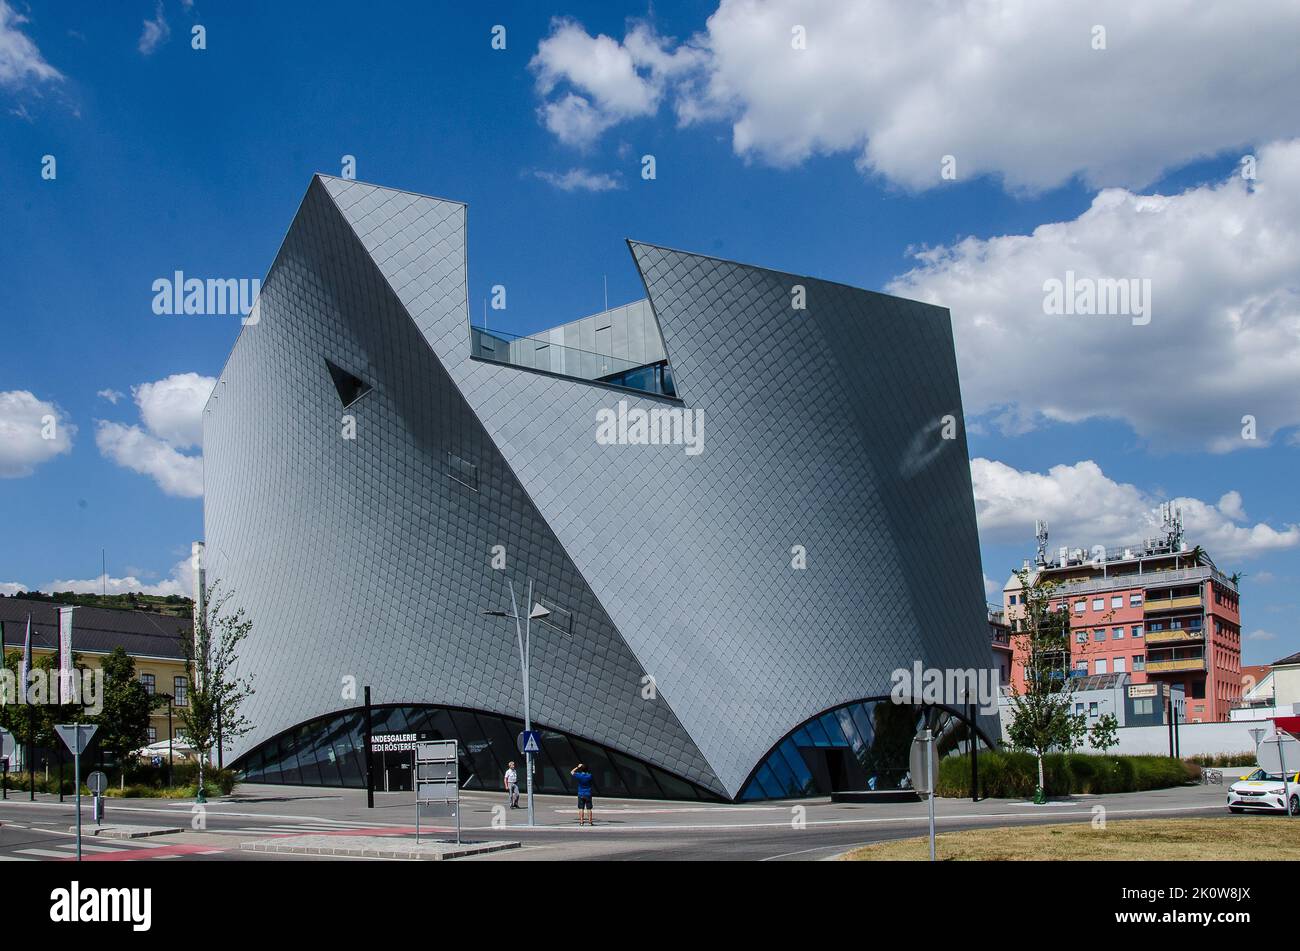 The new State Gallery of Lower Austria in Krems an der Donau is based on the daring vision of the architects and a  determined political will Stock Photo